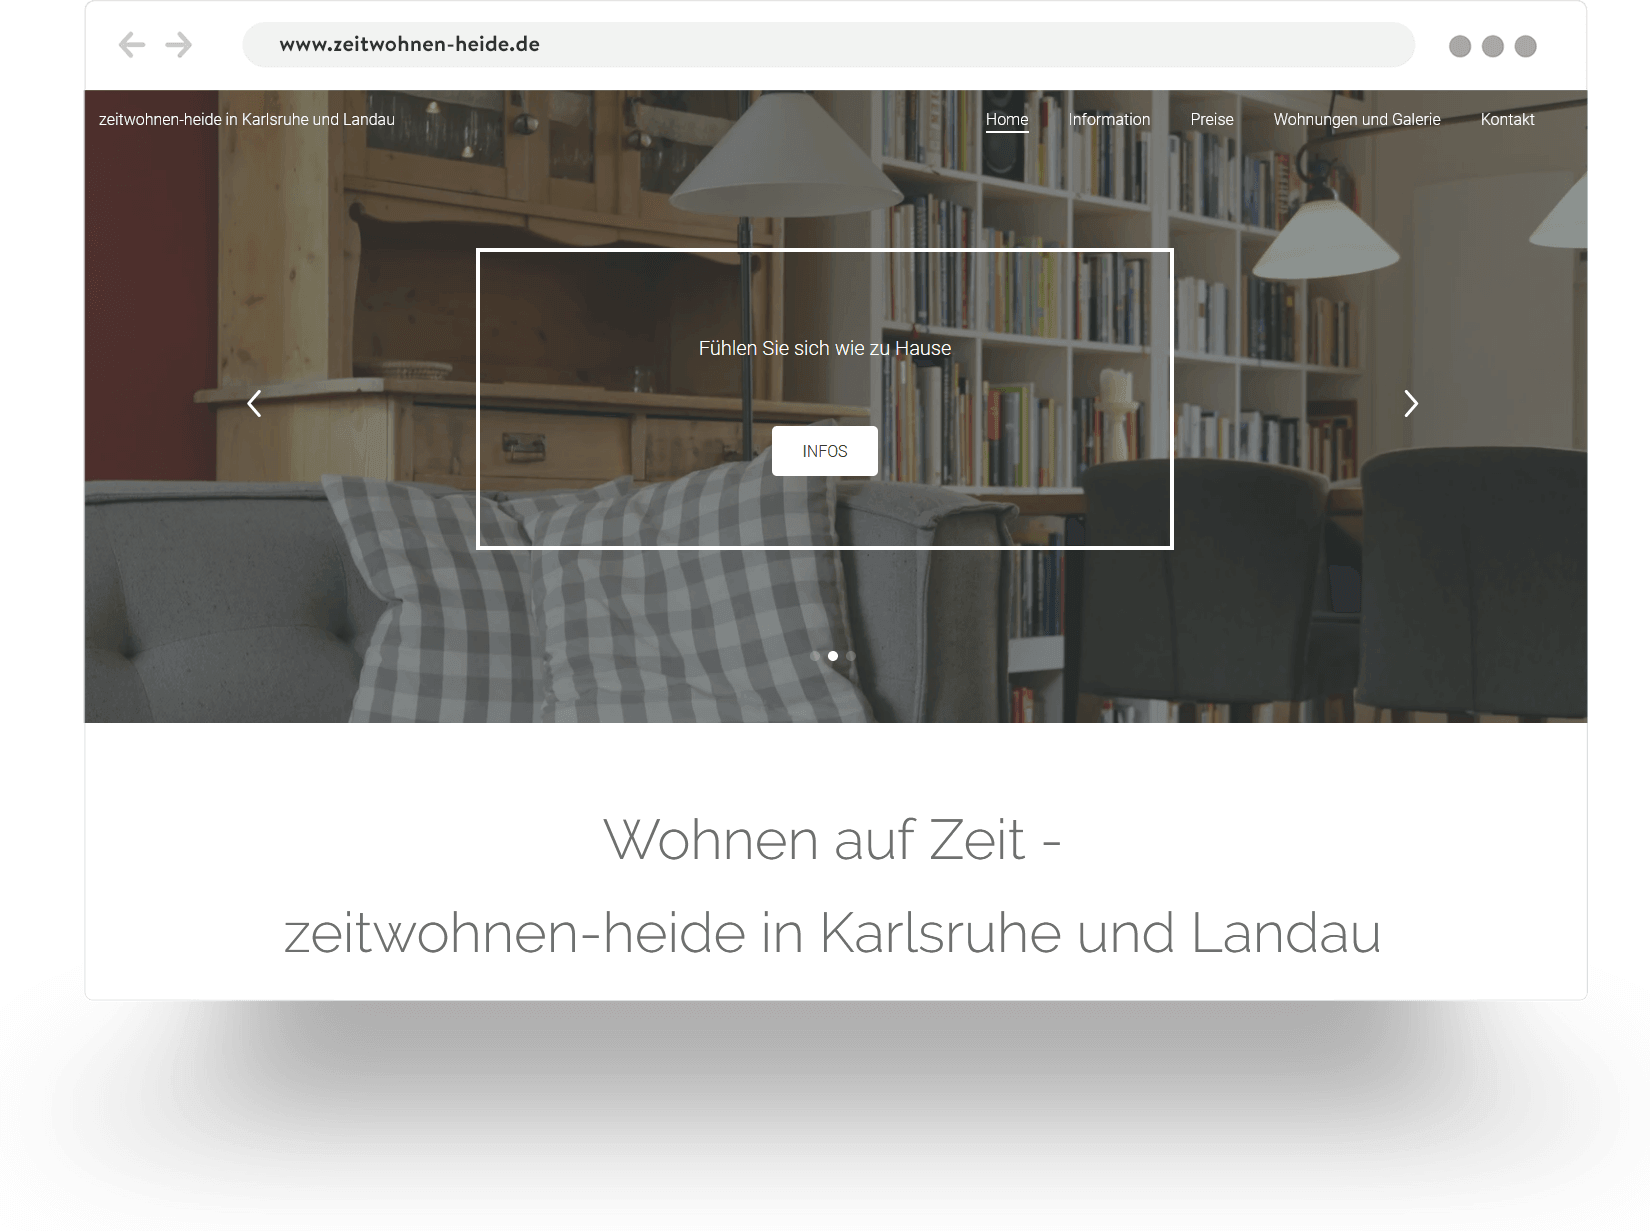 Example of a property rental website built with Jimdo showing the interior of a comfortable apartment 